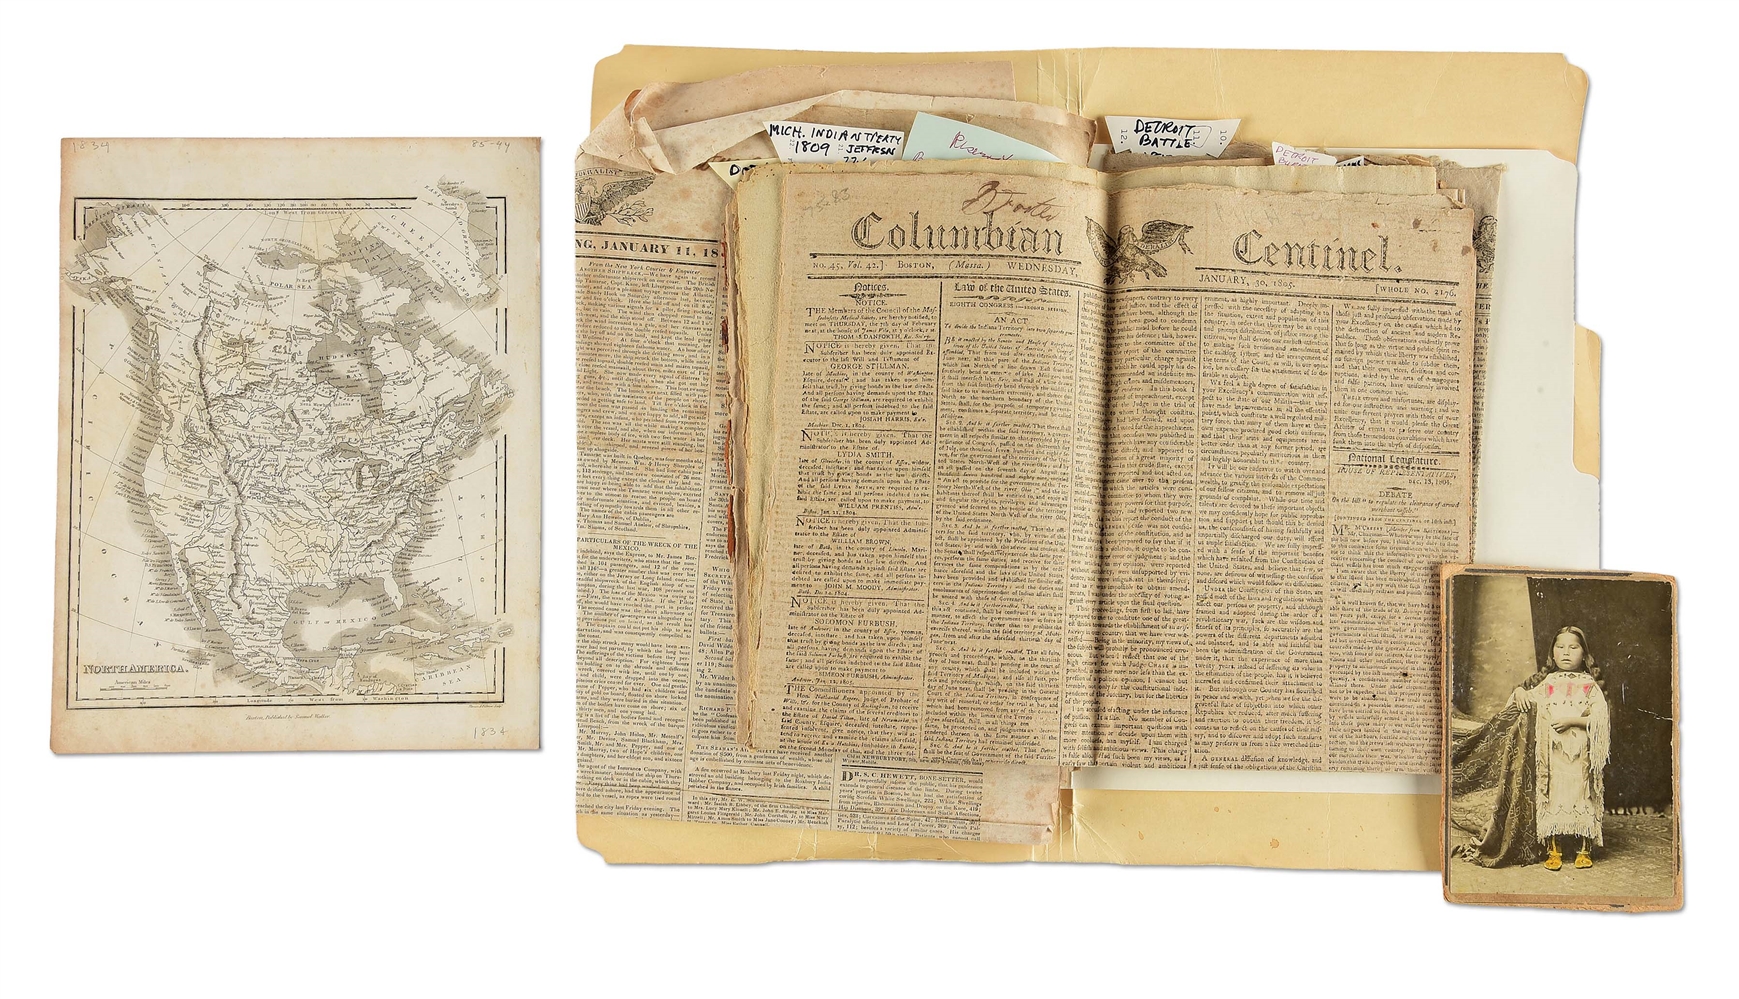 LOT OF EPHEMERA INCLUDING 1834 MAP OF NEW YORK, CABINET CARD OF INDIAN CHILD, AND SEVERAL NEWSPAPERS WITH ARTICLES REFERING TO NATIVES.